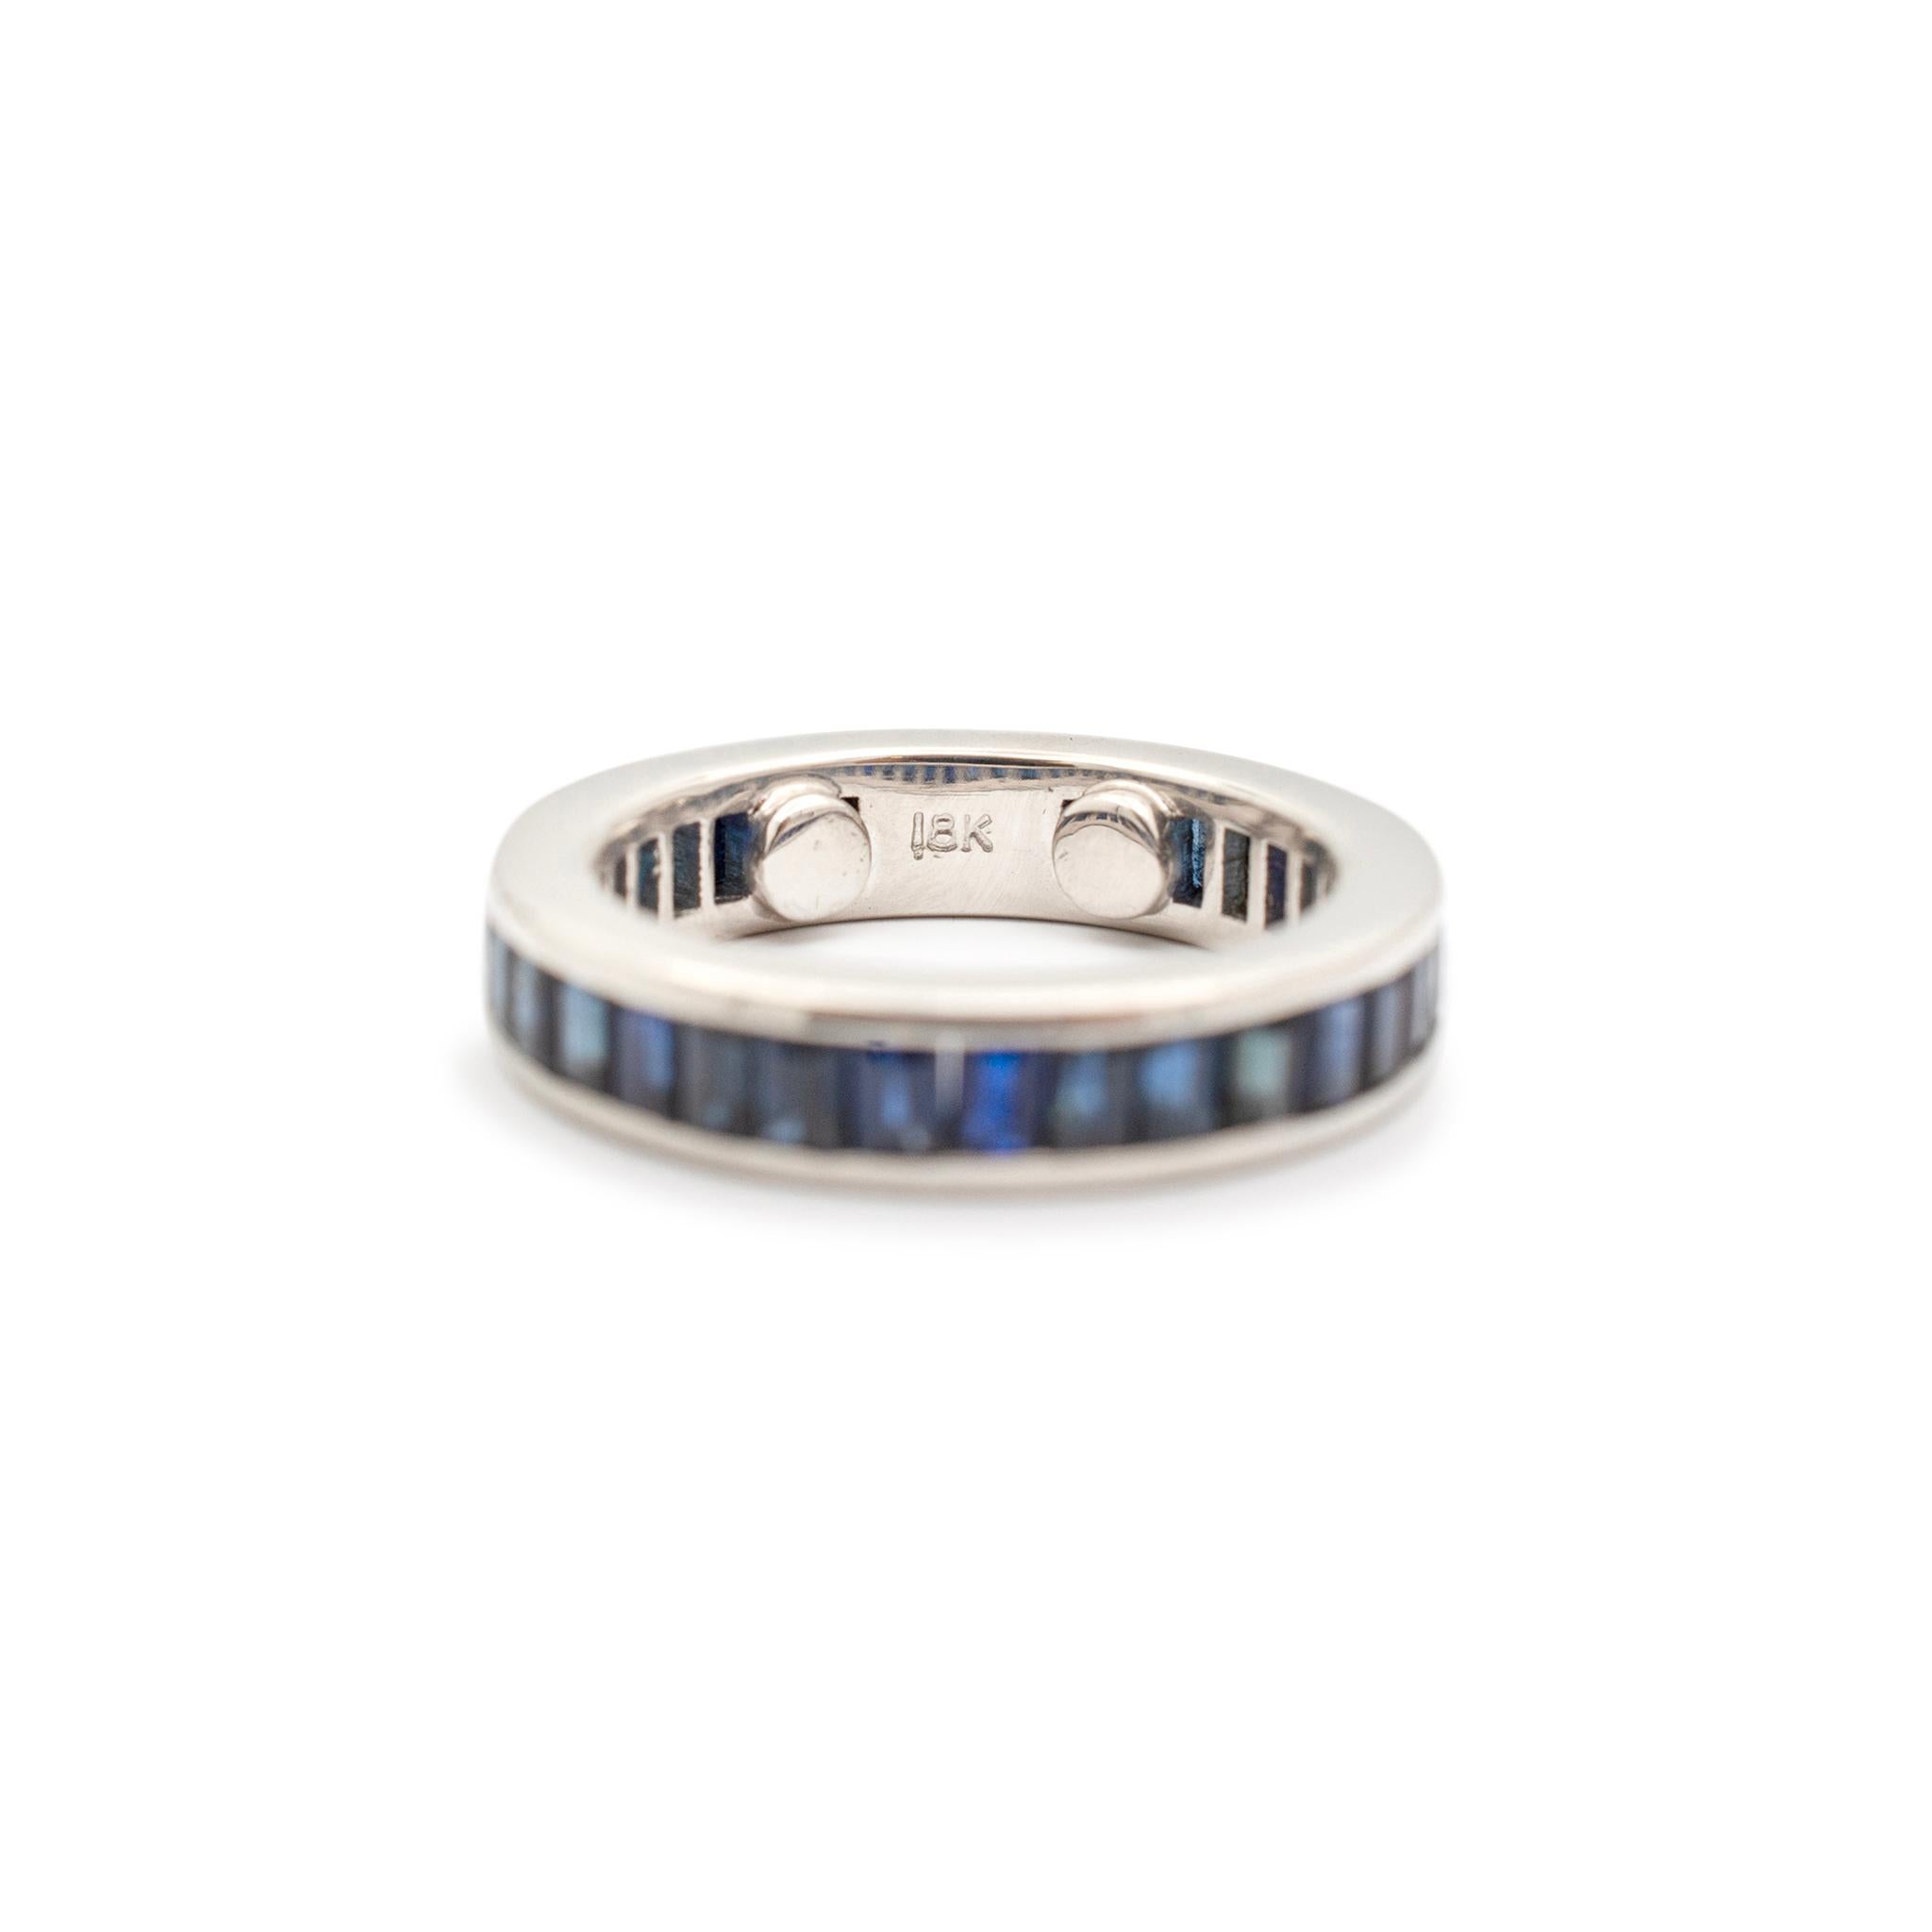 Gender: Ladies

Metal Type: 18K White Gold

Size: 5.5

Shank Maximum Width: 4.80 mm

Weight: 6.70 grams

Ladies 18K white gold sapphire eternity band with a soft-square shank. Engraved with 